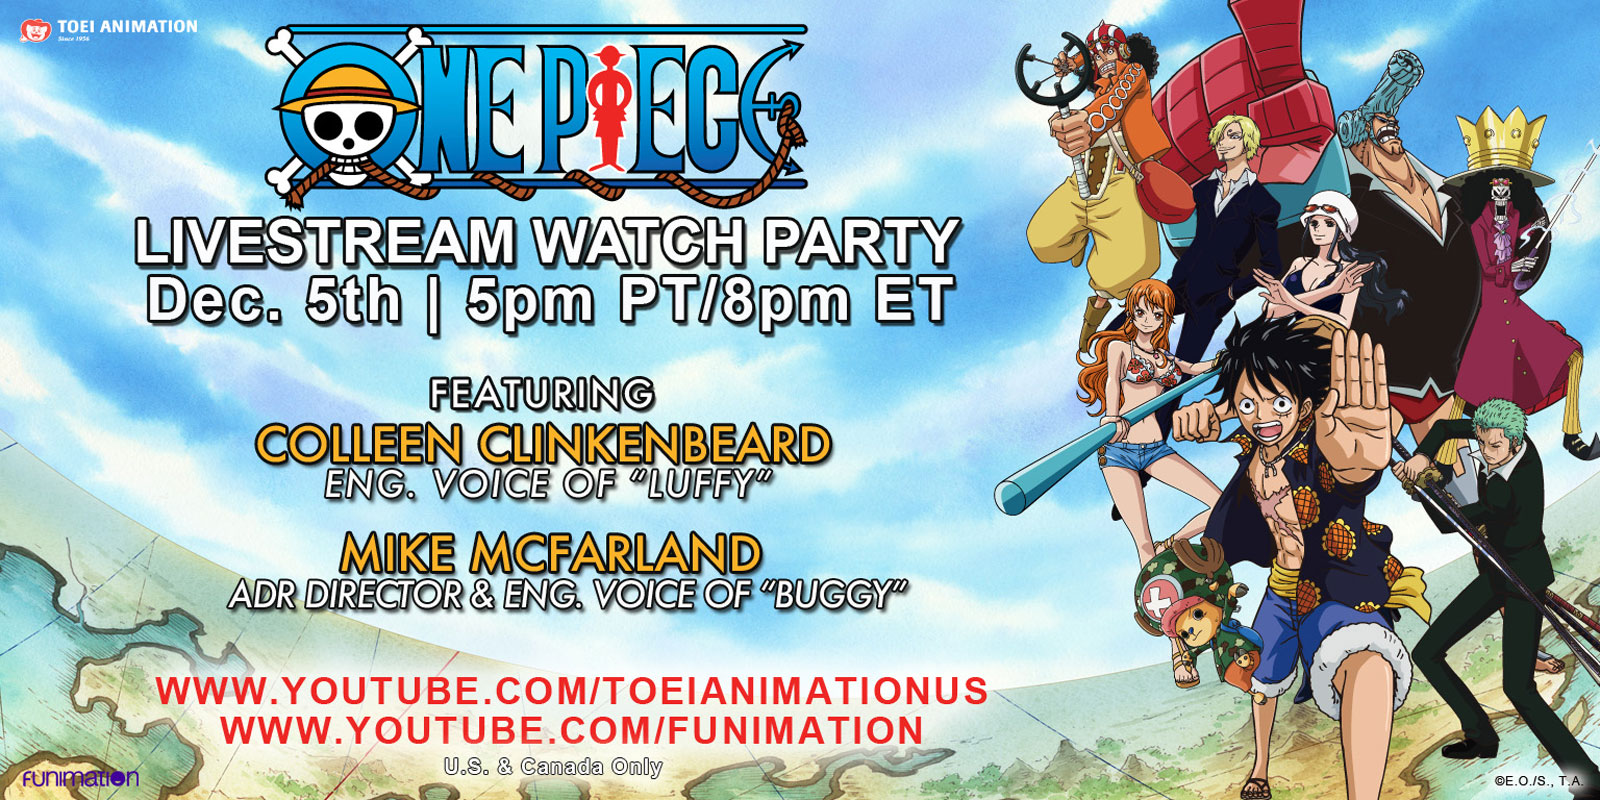 TOEI ANIMATION AND FUNIMATION ANNOUNCE ONE PIECE DUB LIVESTREAM WATCH PARTY FOR YOUTUBE IN THE U.S. & CANADA!